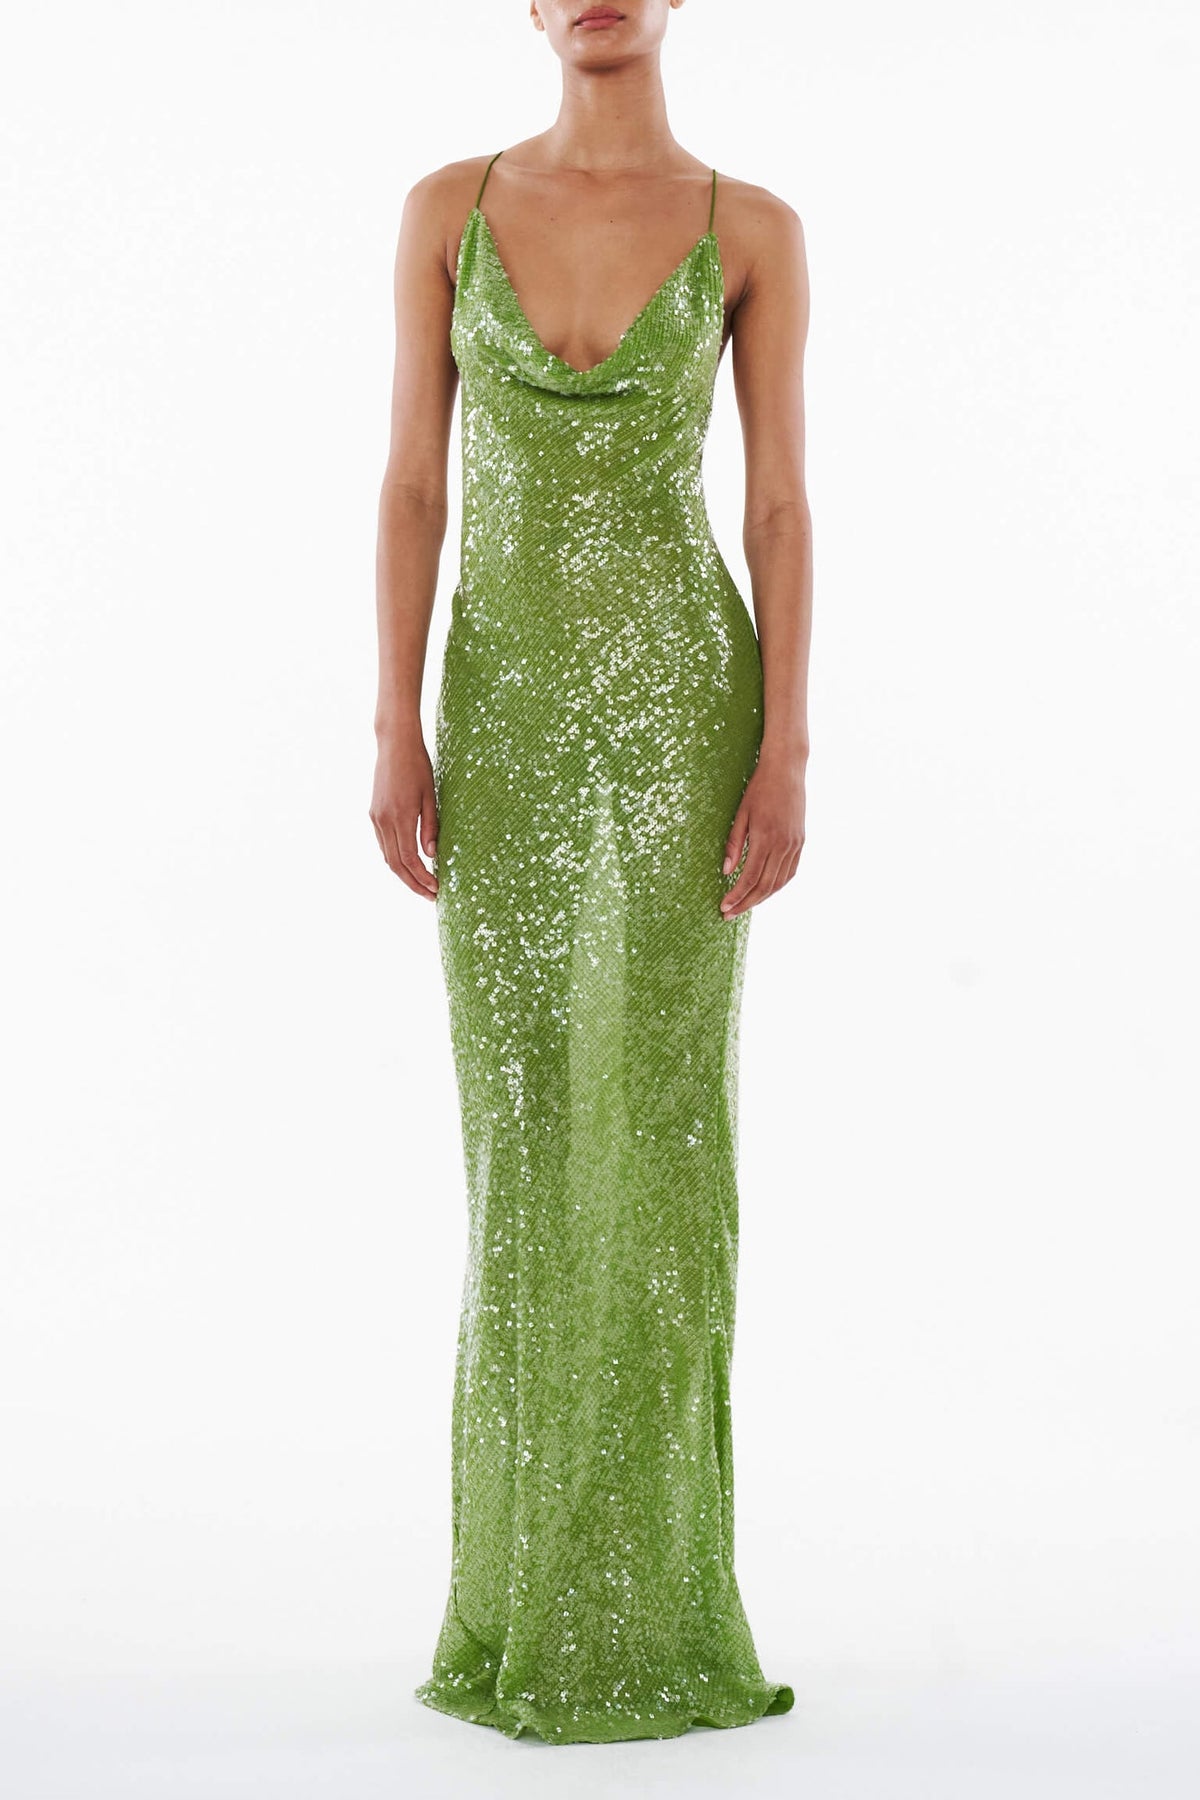 Rat and Boa Gaia Gown